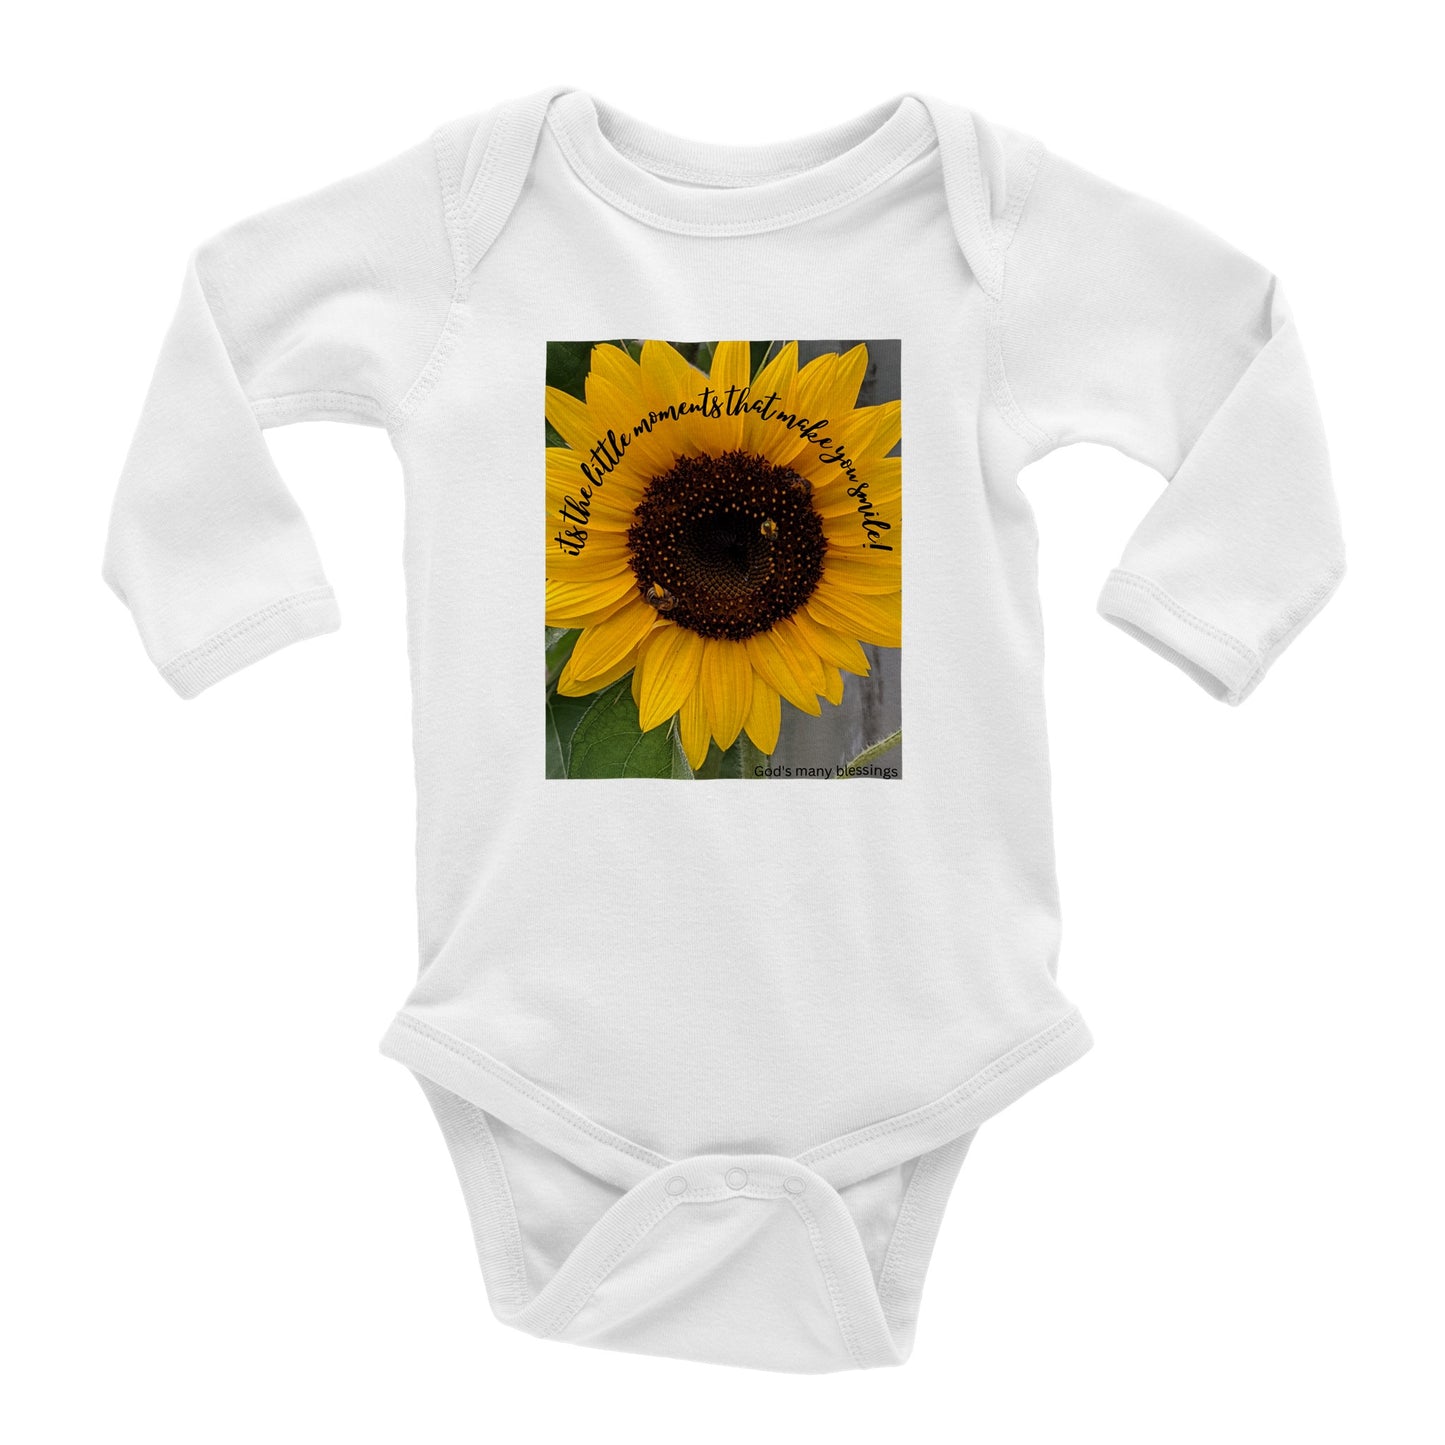 Brighten your day with a sunflower smile Classic Baby Long Sleeve Bodysuit